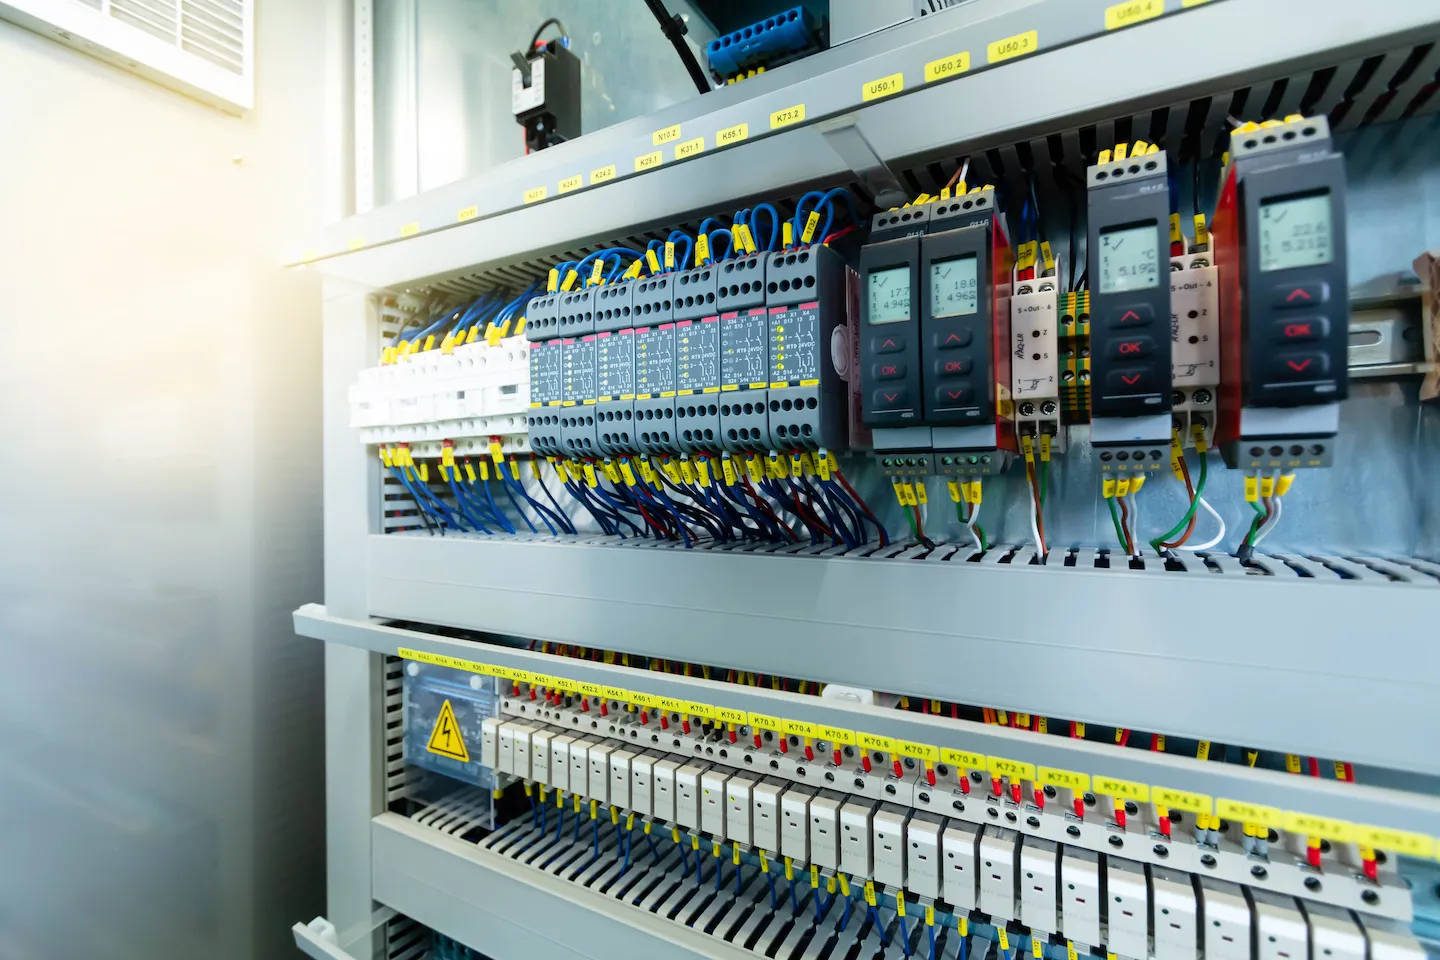 Commercial electrical control panel for power distribution.